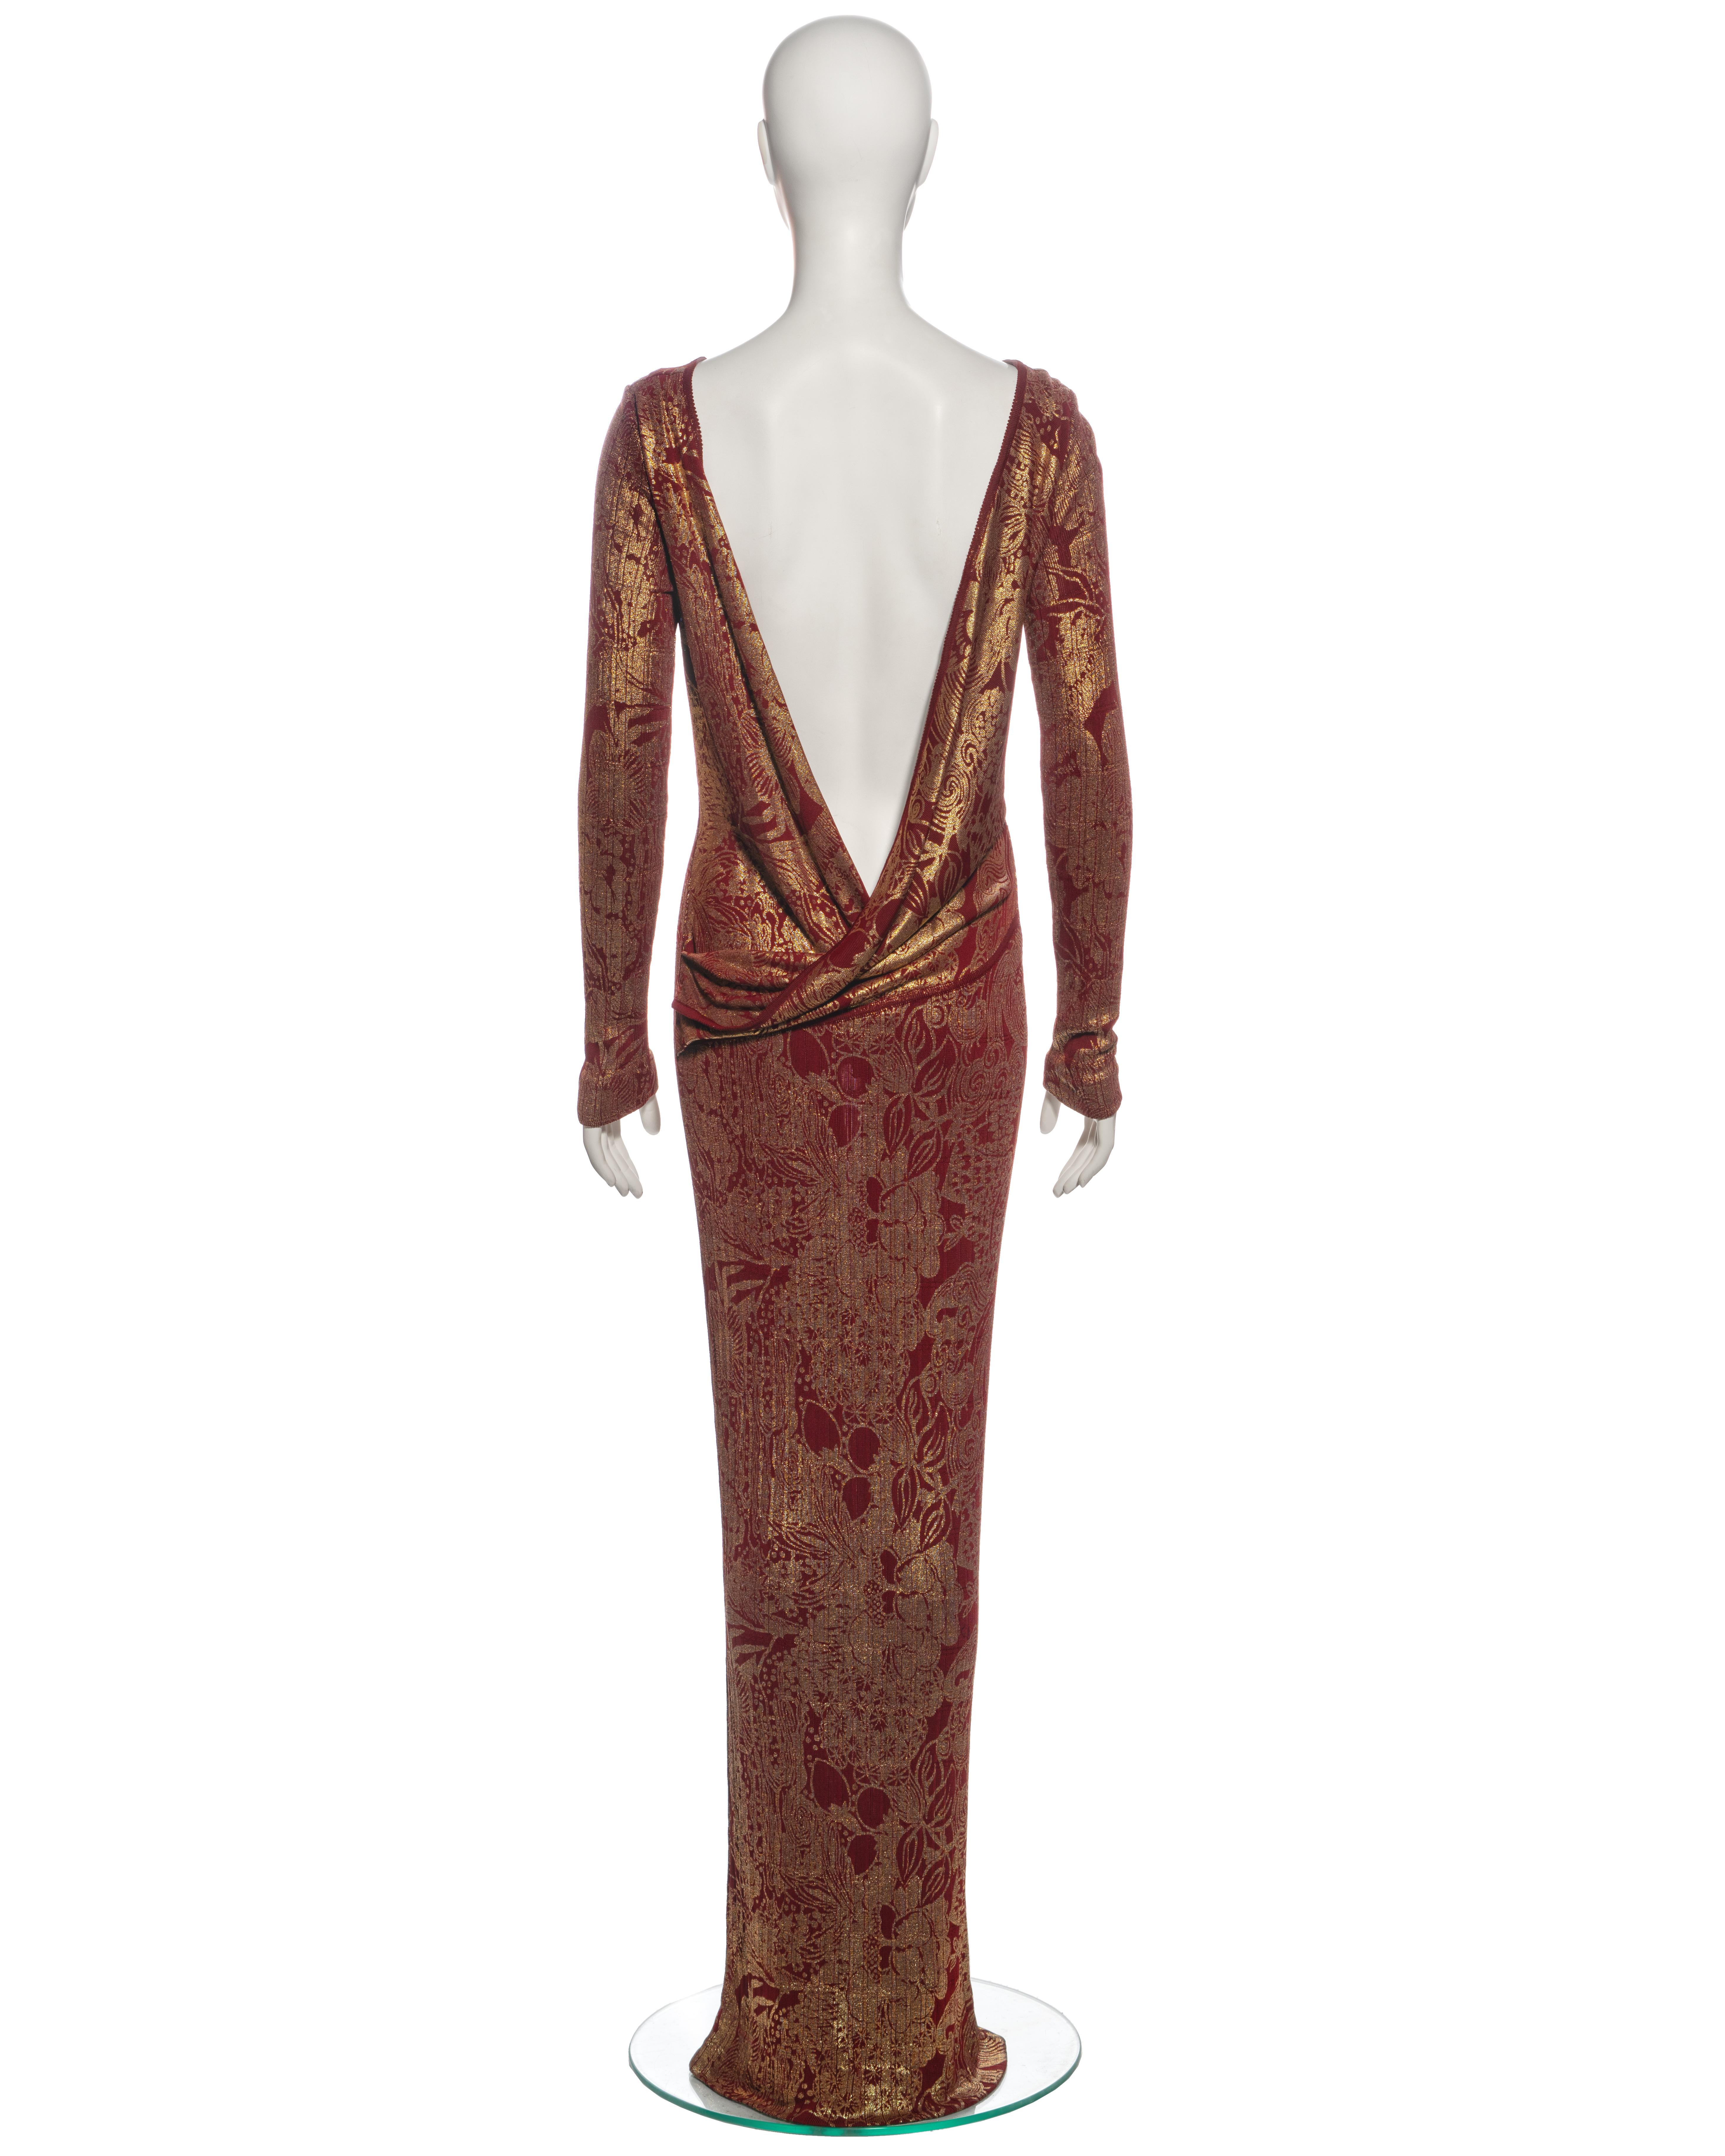 John Galliano Bordeaux Knit Evening Dress with Gold Foil Floral Print, fw 1998 For Sale 5